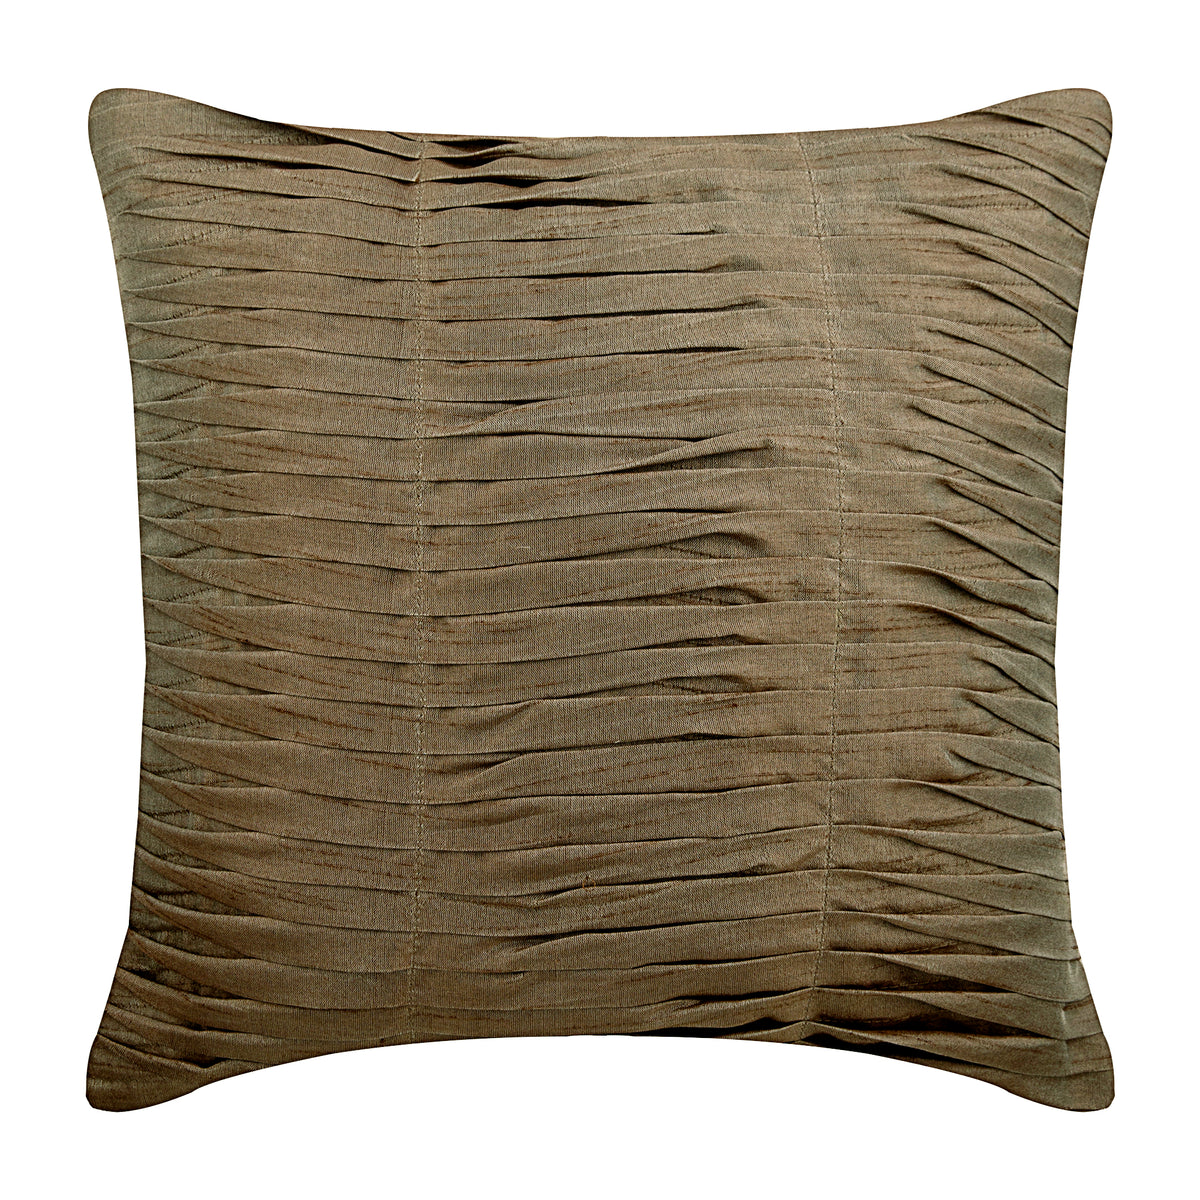 White Textured Wave Throw Pillow Cover 22x22